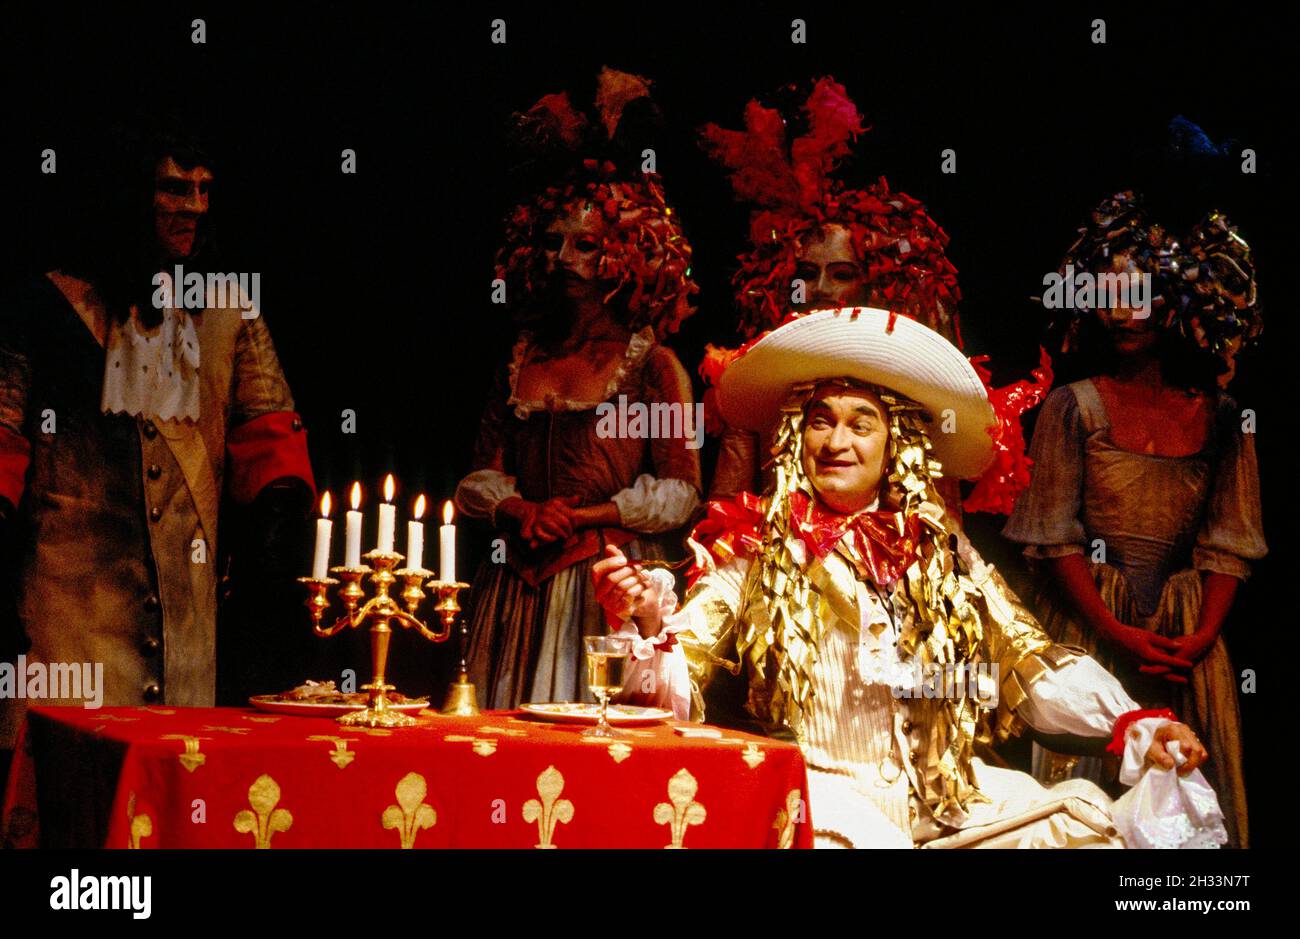 Derek Godfrey (King Louis XIV) in MOLIERE by Bulgakov at the Royal Shakespeare Company (RSC), The Other Place, Stratford-upon-Avon  05/08/1982  in a new version by Dusty Hughes  set design: Ralph Koltai  costumes: Annena Stubbs  lighting: Leo Leibovici  director: Bill Alexander Stock Photo